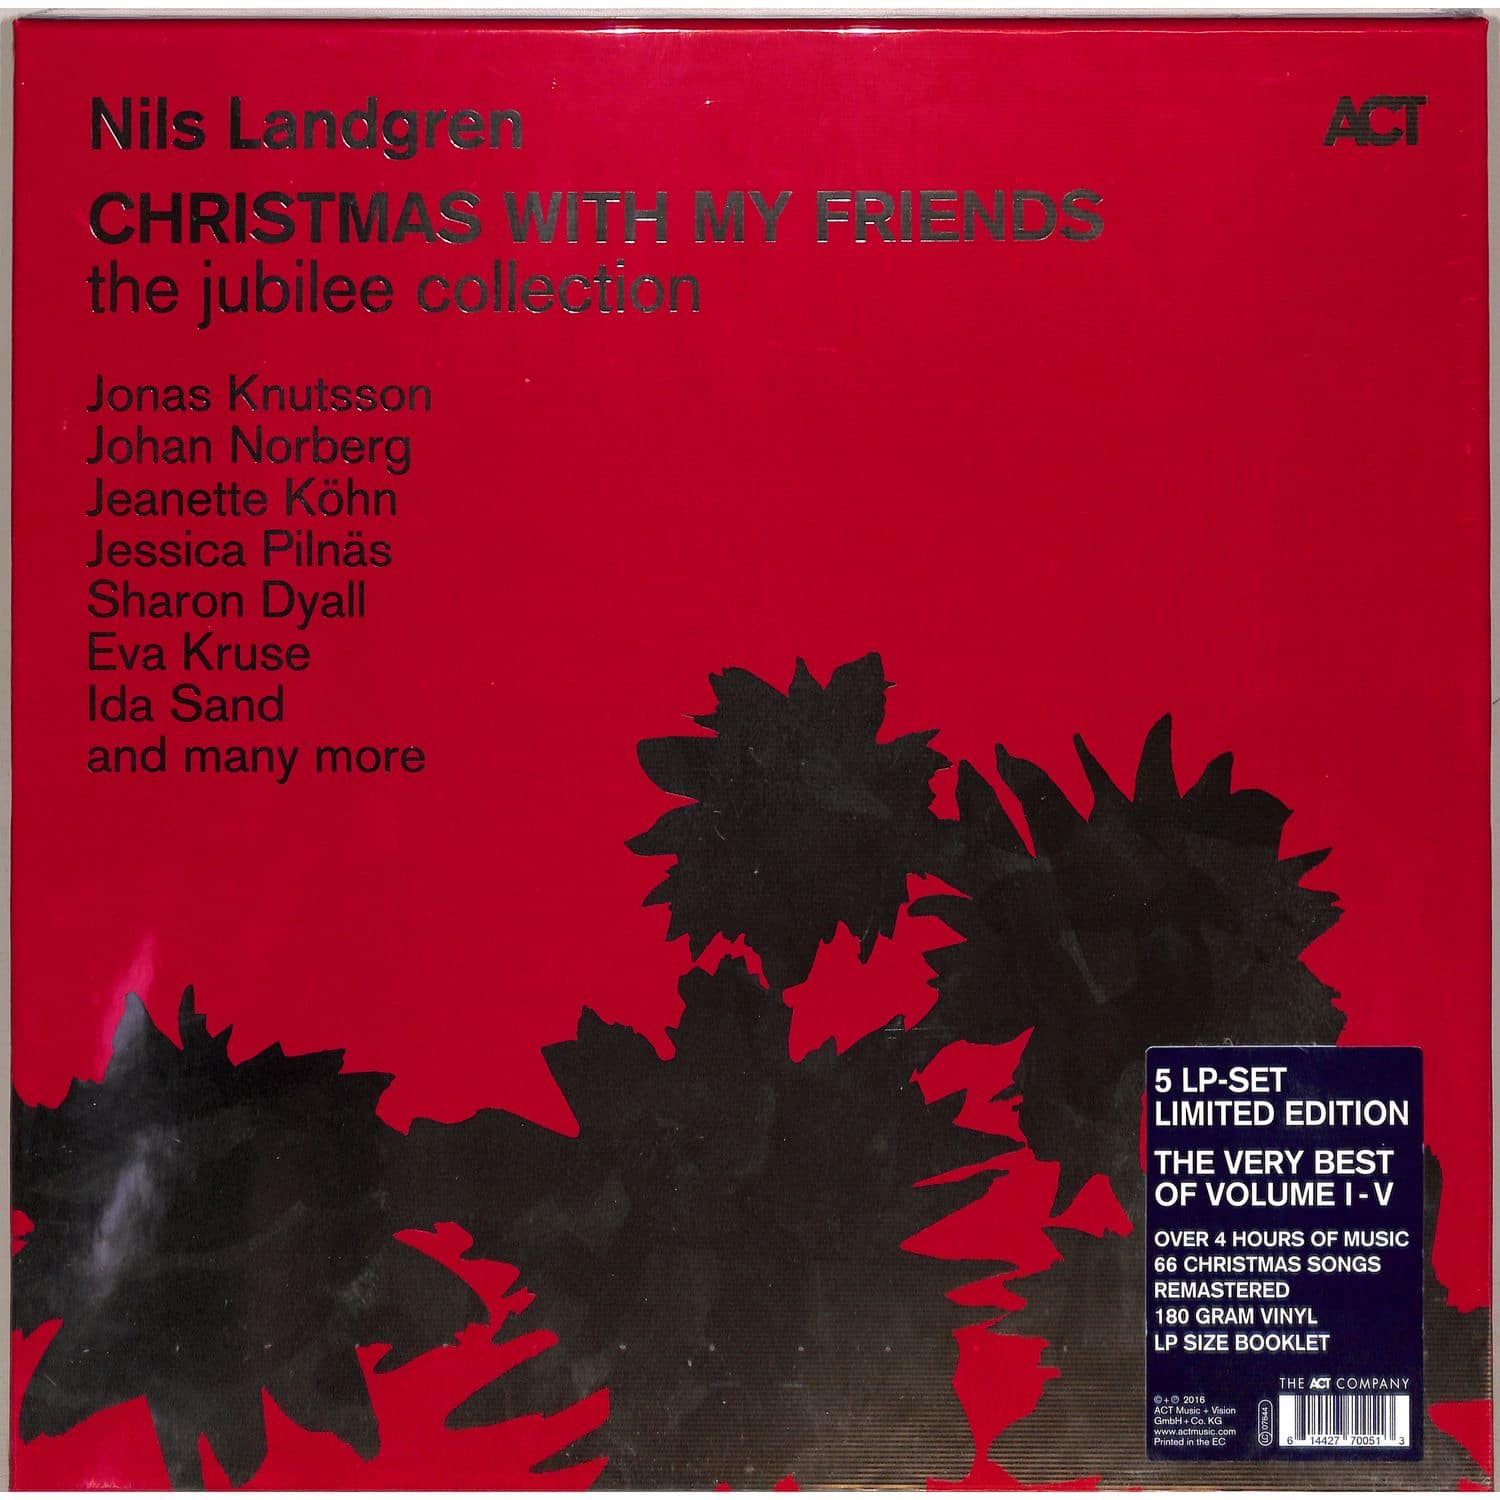 Nils Landgren - CHRISTMAS WITH MY FRIENDS THE JUBILEE COLLECTION 